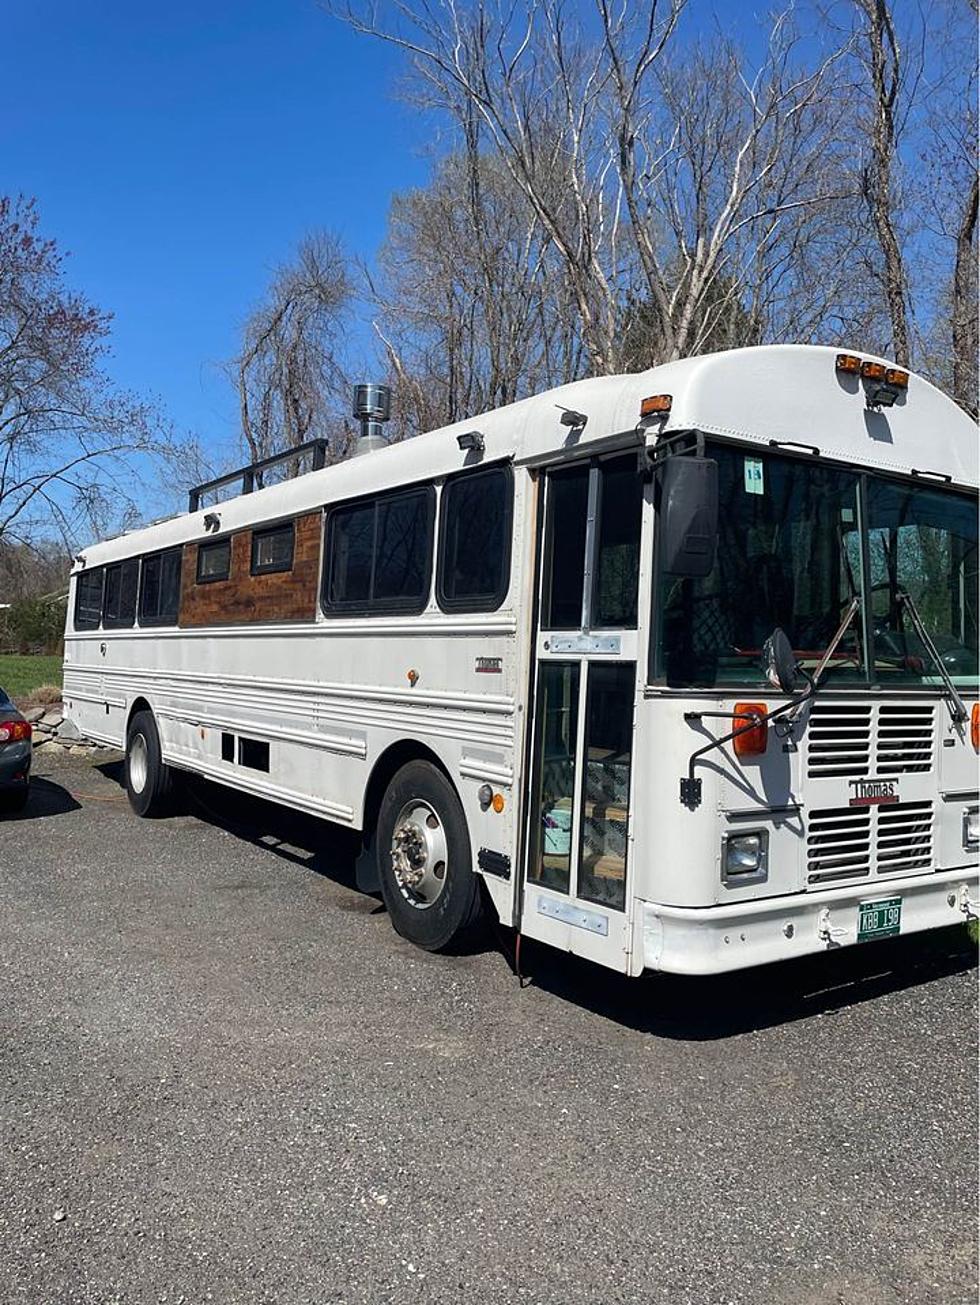 For Sale, Beautiful Bus Conversion With Surprising Heat System